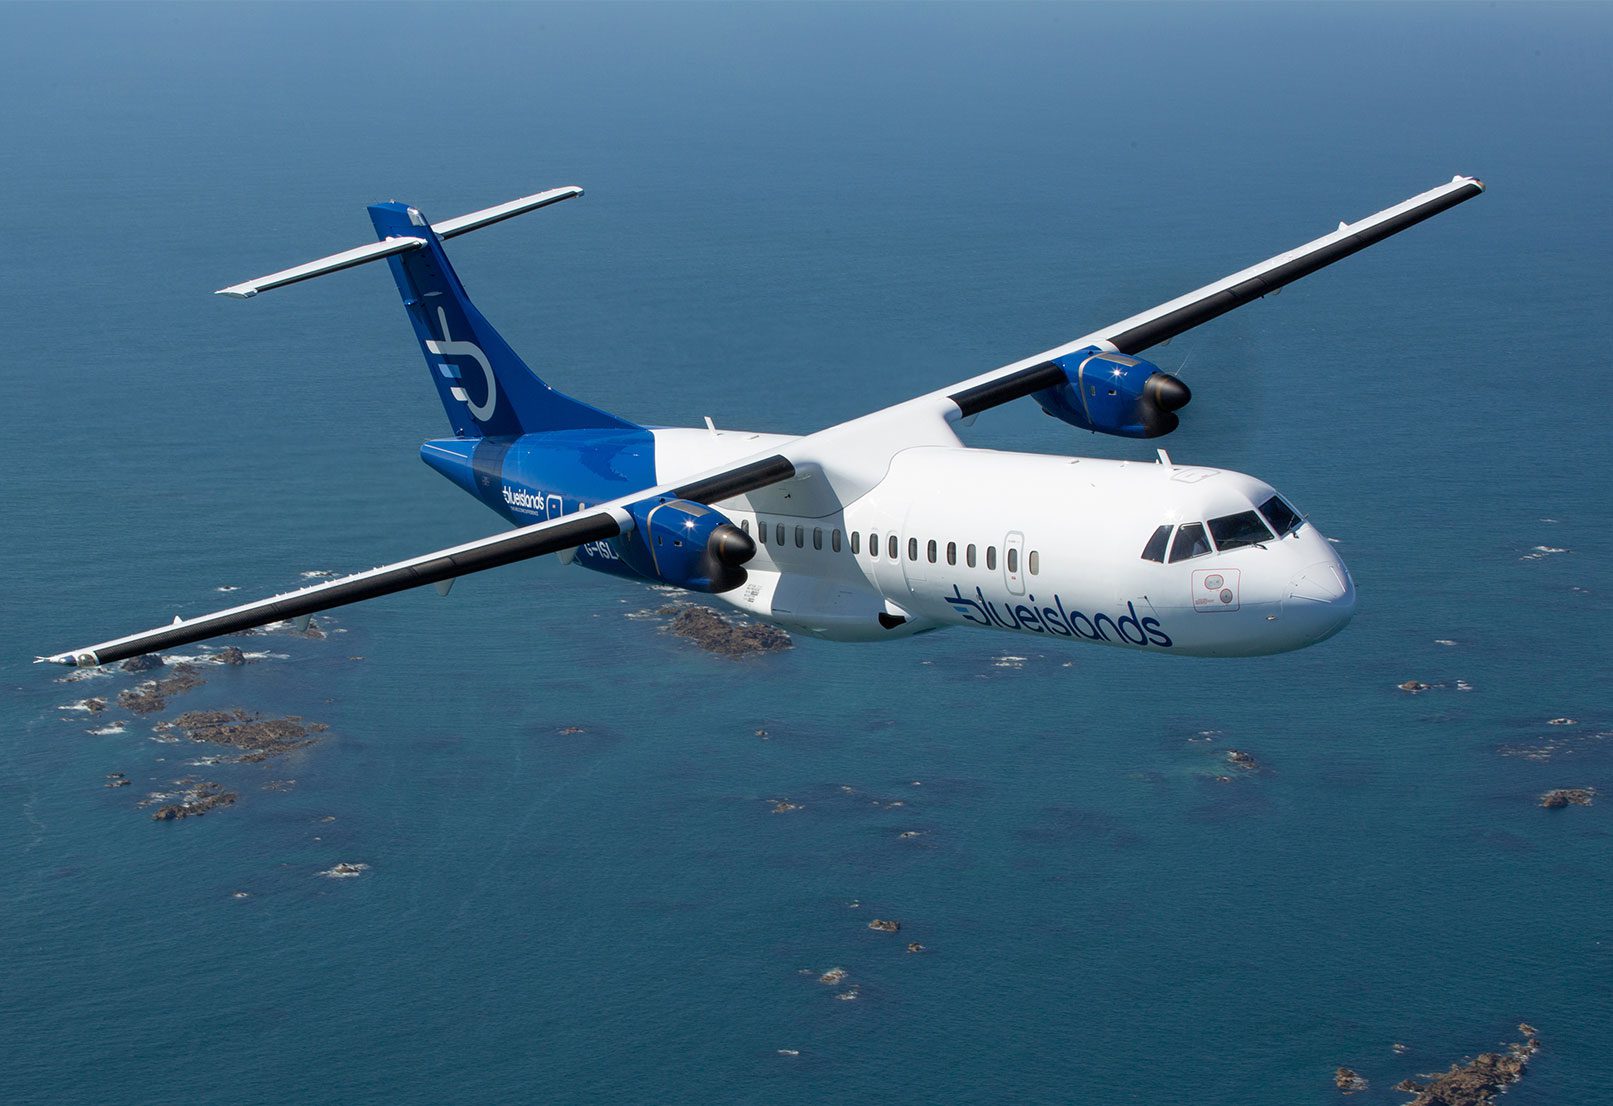 Falko Acquires One ATR72-500 Aircraft on Lease to Blue Islands